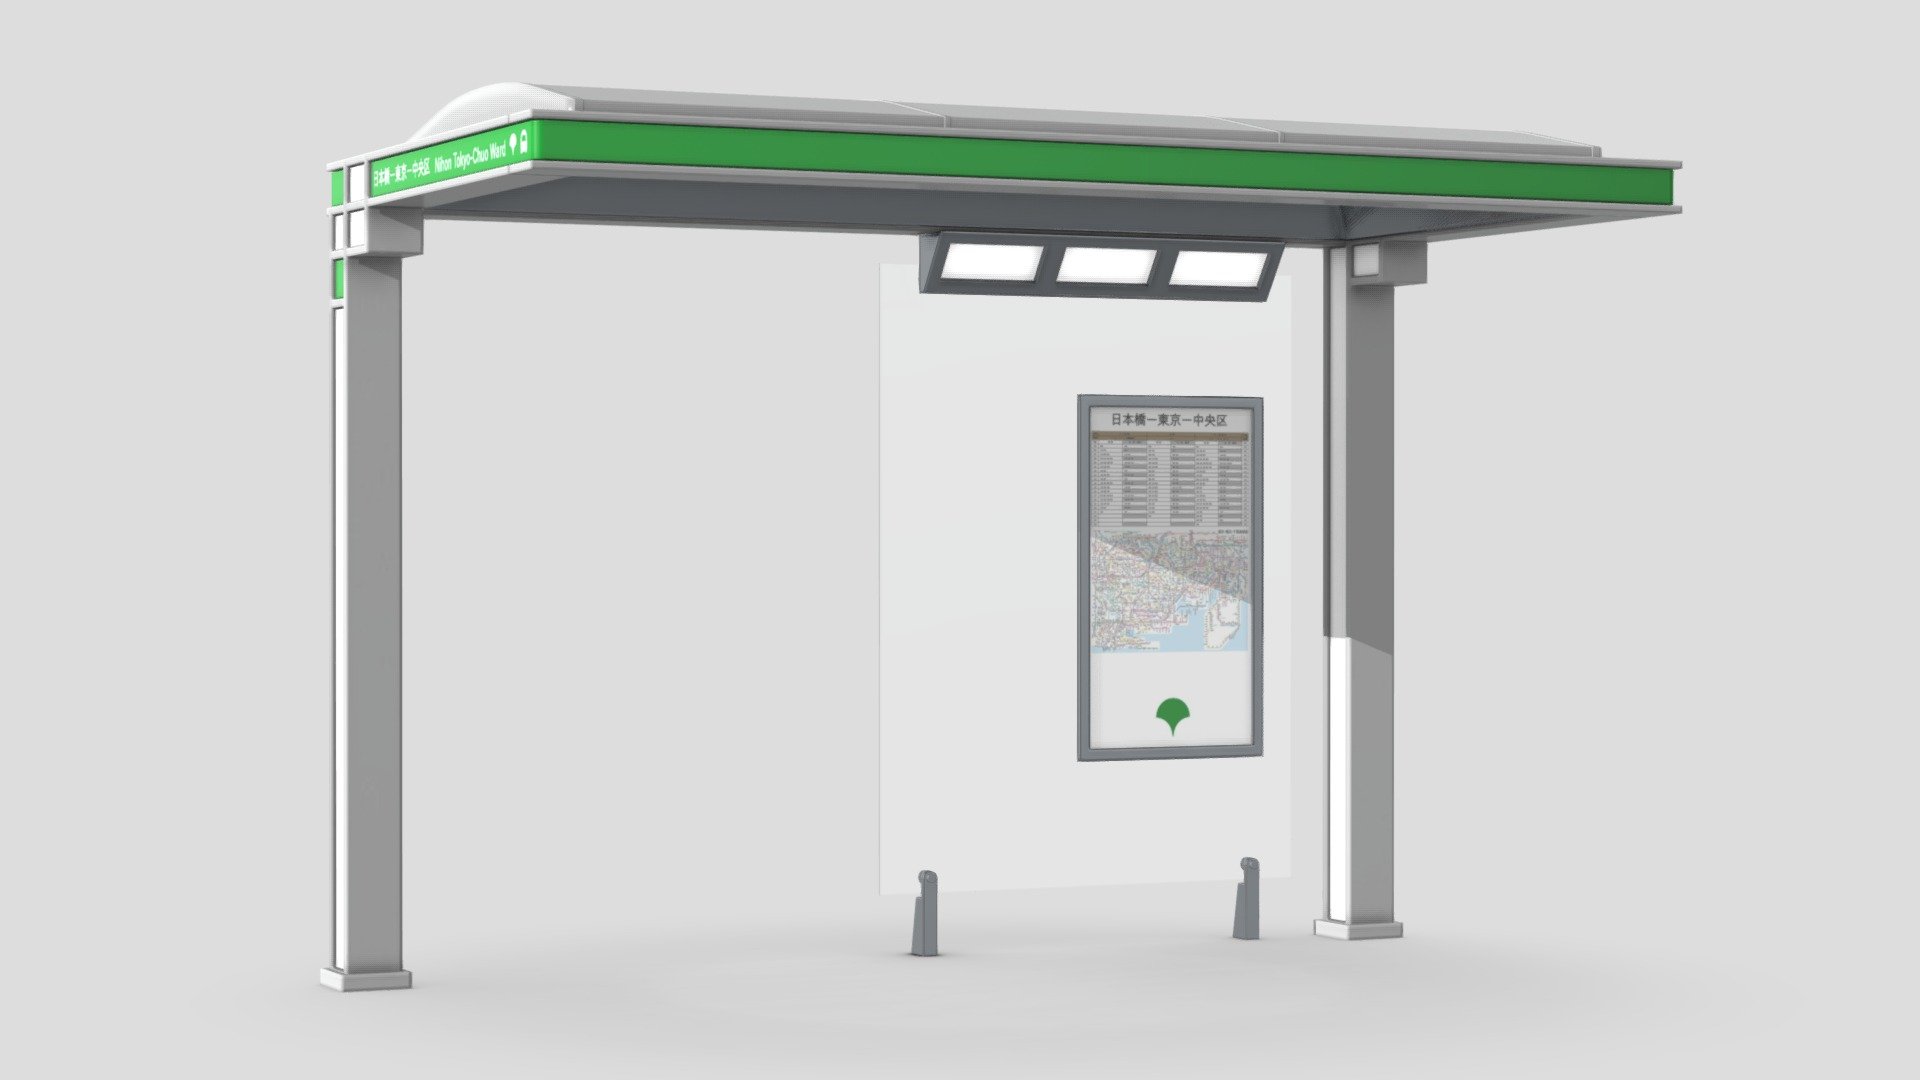 Tokyo Bus Stop 
Created in blender 2.79b 
Textures made with Substance painter

Available in Second Life - Tokyo Bus Stop - 3D model by Hello Japan (@HelloJapanSL) 3d model